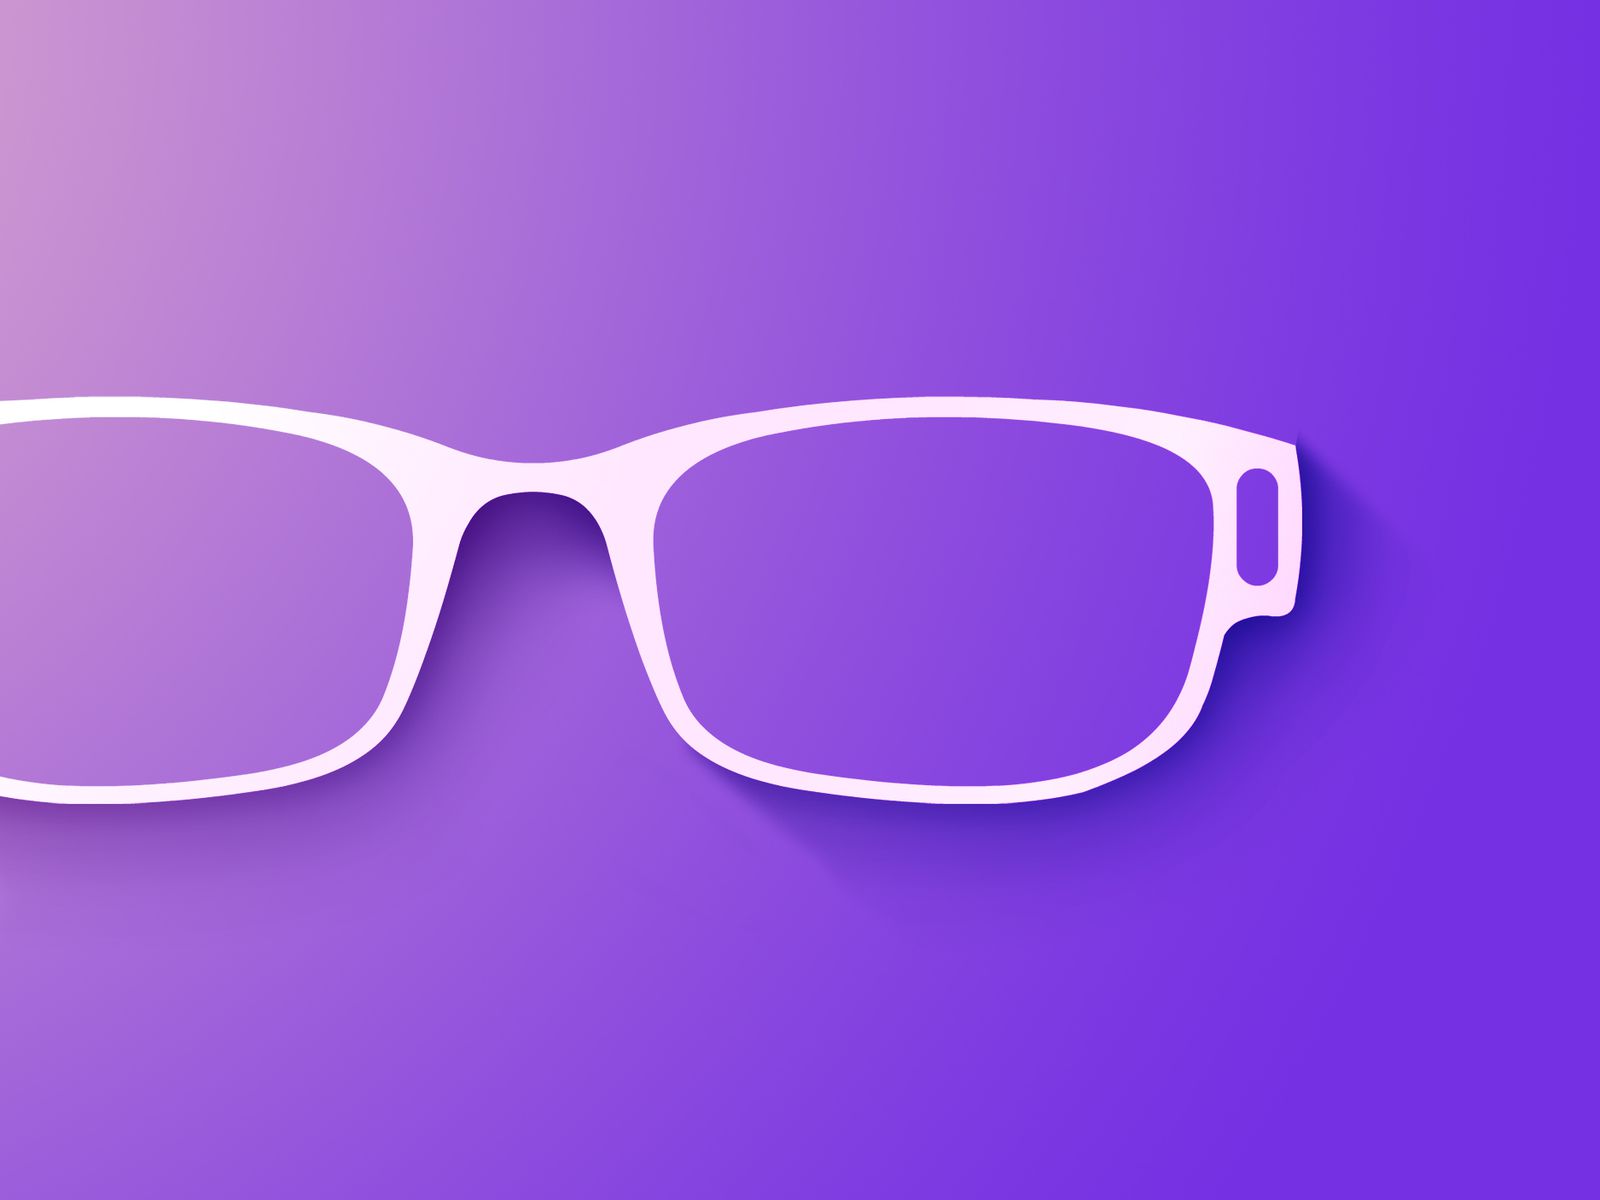 Apple Glasses launch still years away, and Xiaomi shows us why